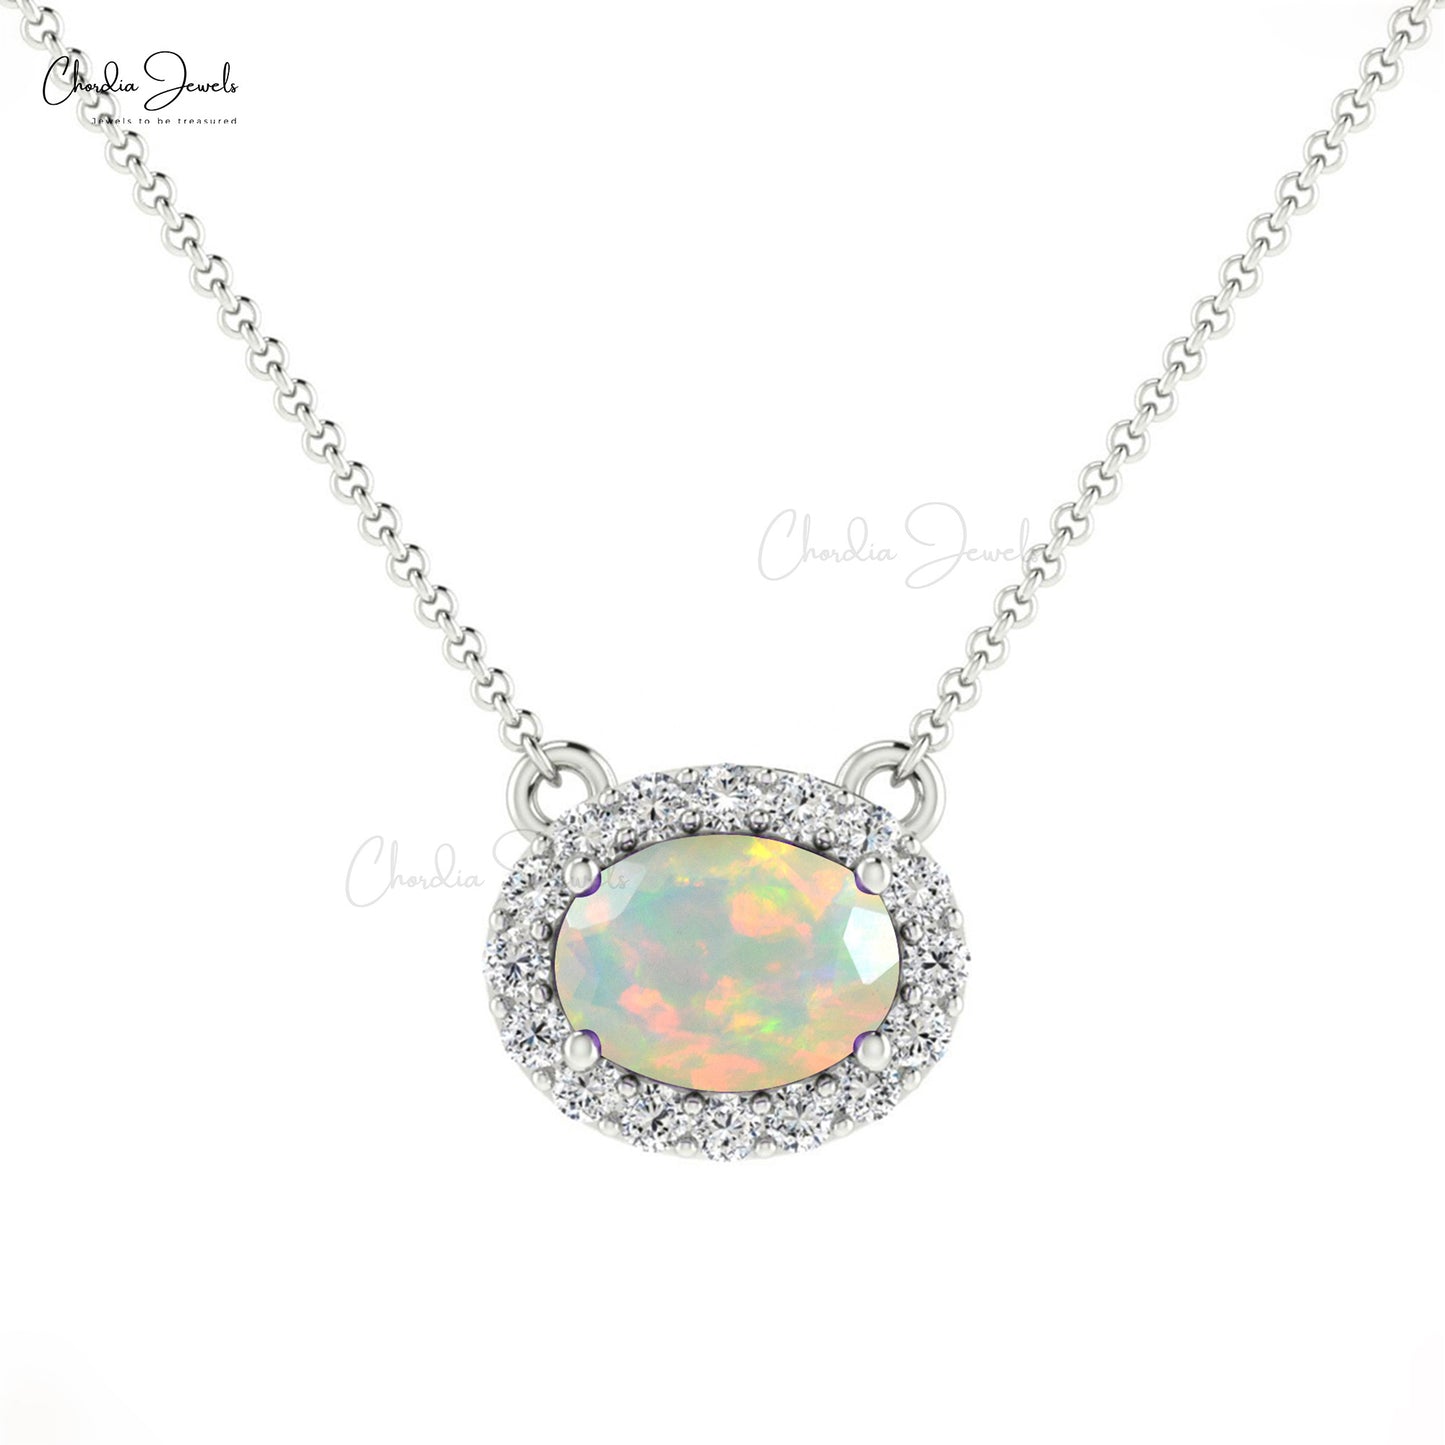 Vintage Style 7X5MM Opal and Diamond Halo Necklace